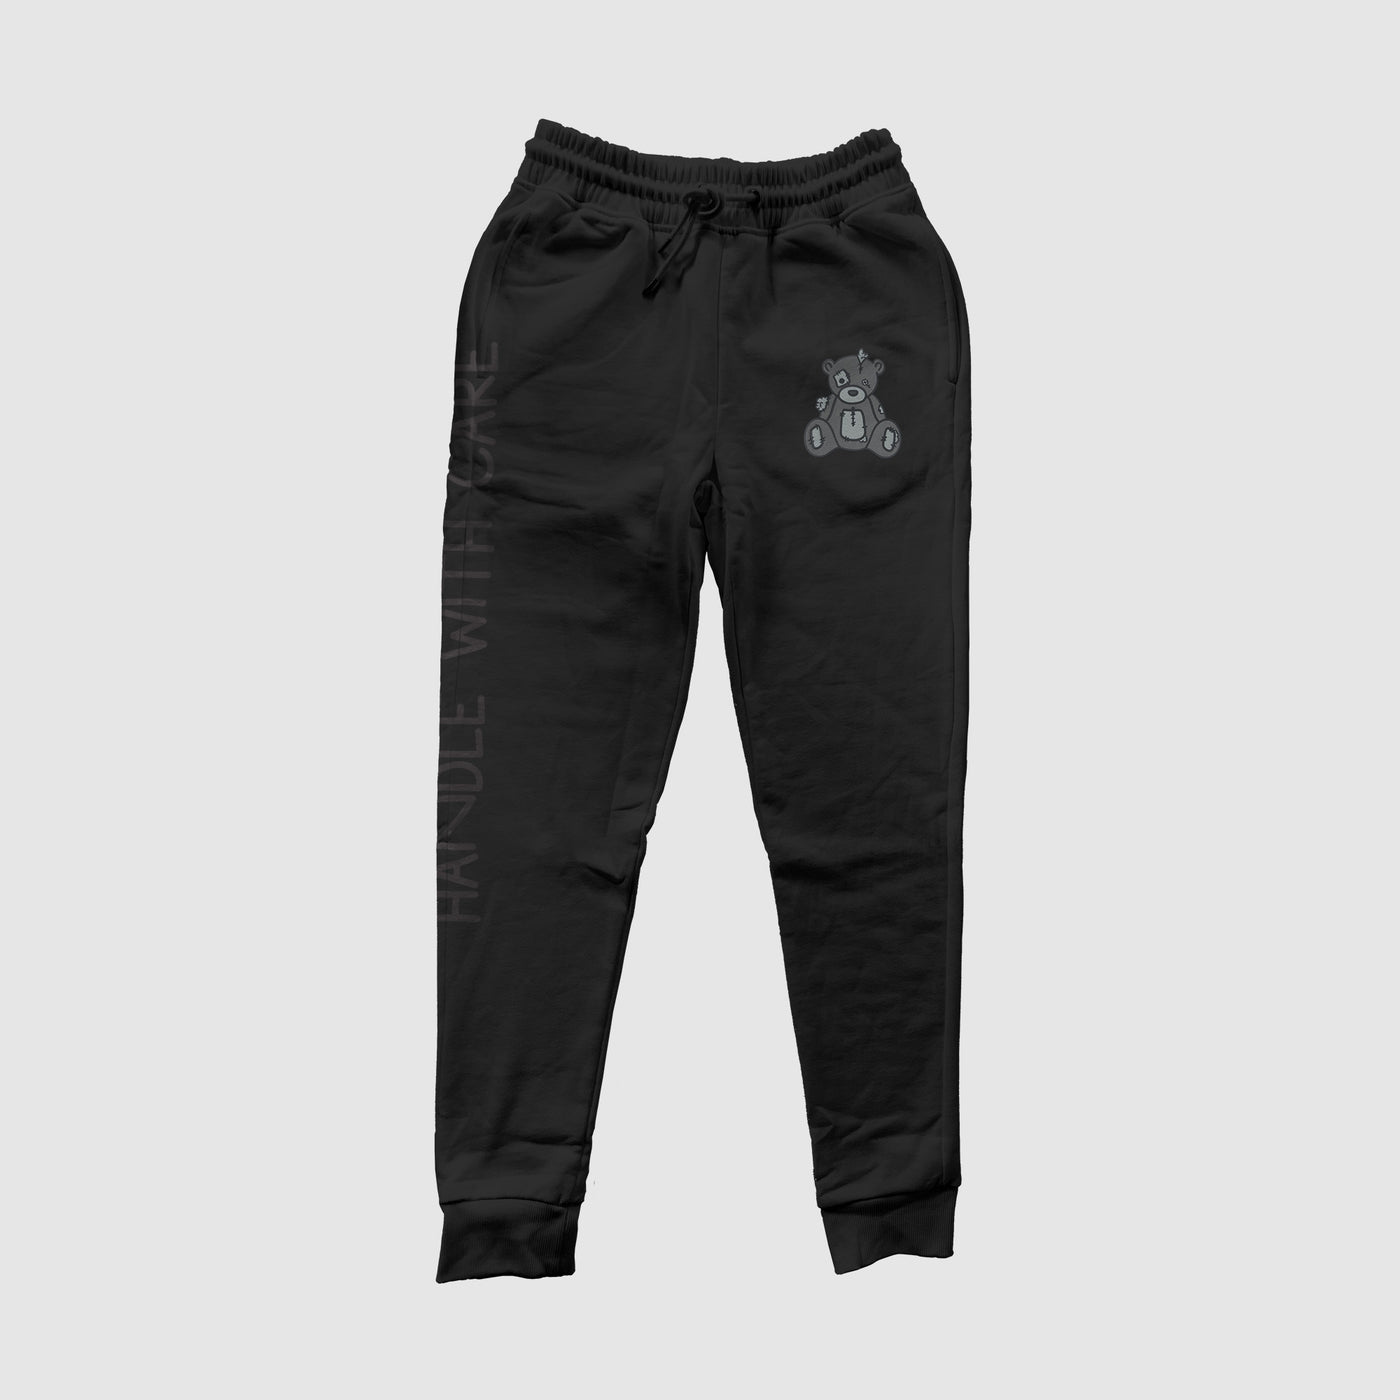 Handle With Care Blackout Jogger Pants
Our Handle with Care Joggers feature Patches the Dream Teddy Bear. Patches is a reminder that we're capable of overcoming anything that comes our way. It's a gentleDREAM Clothing 